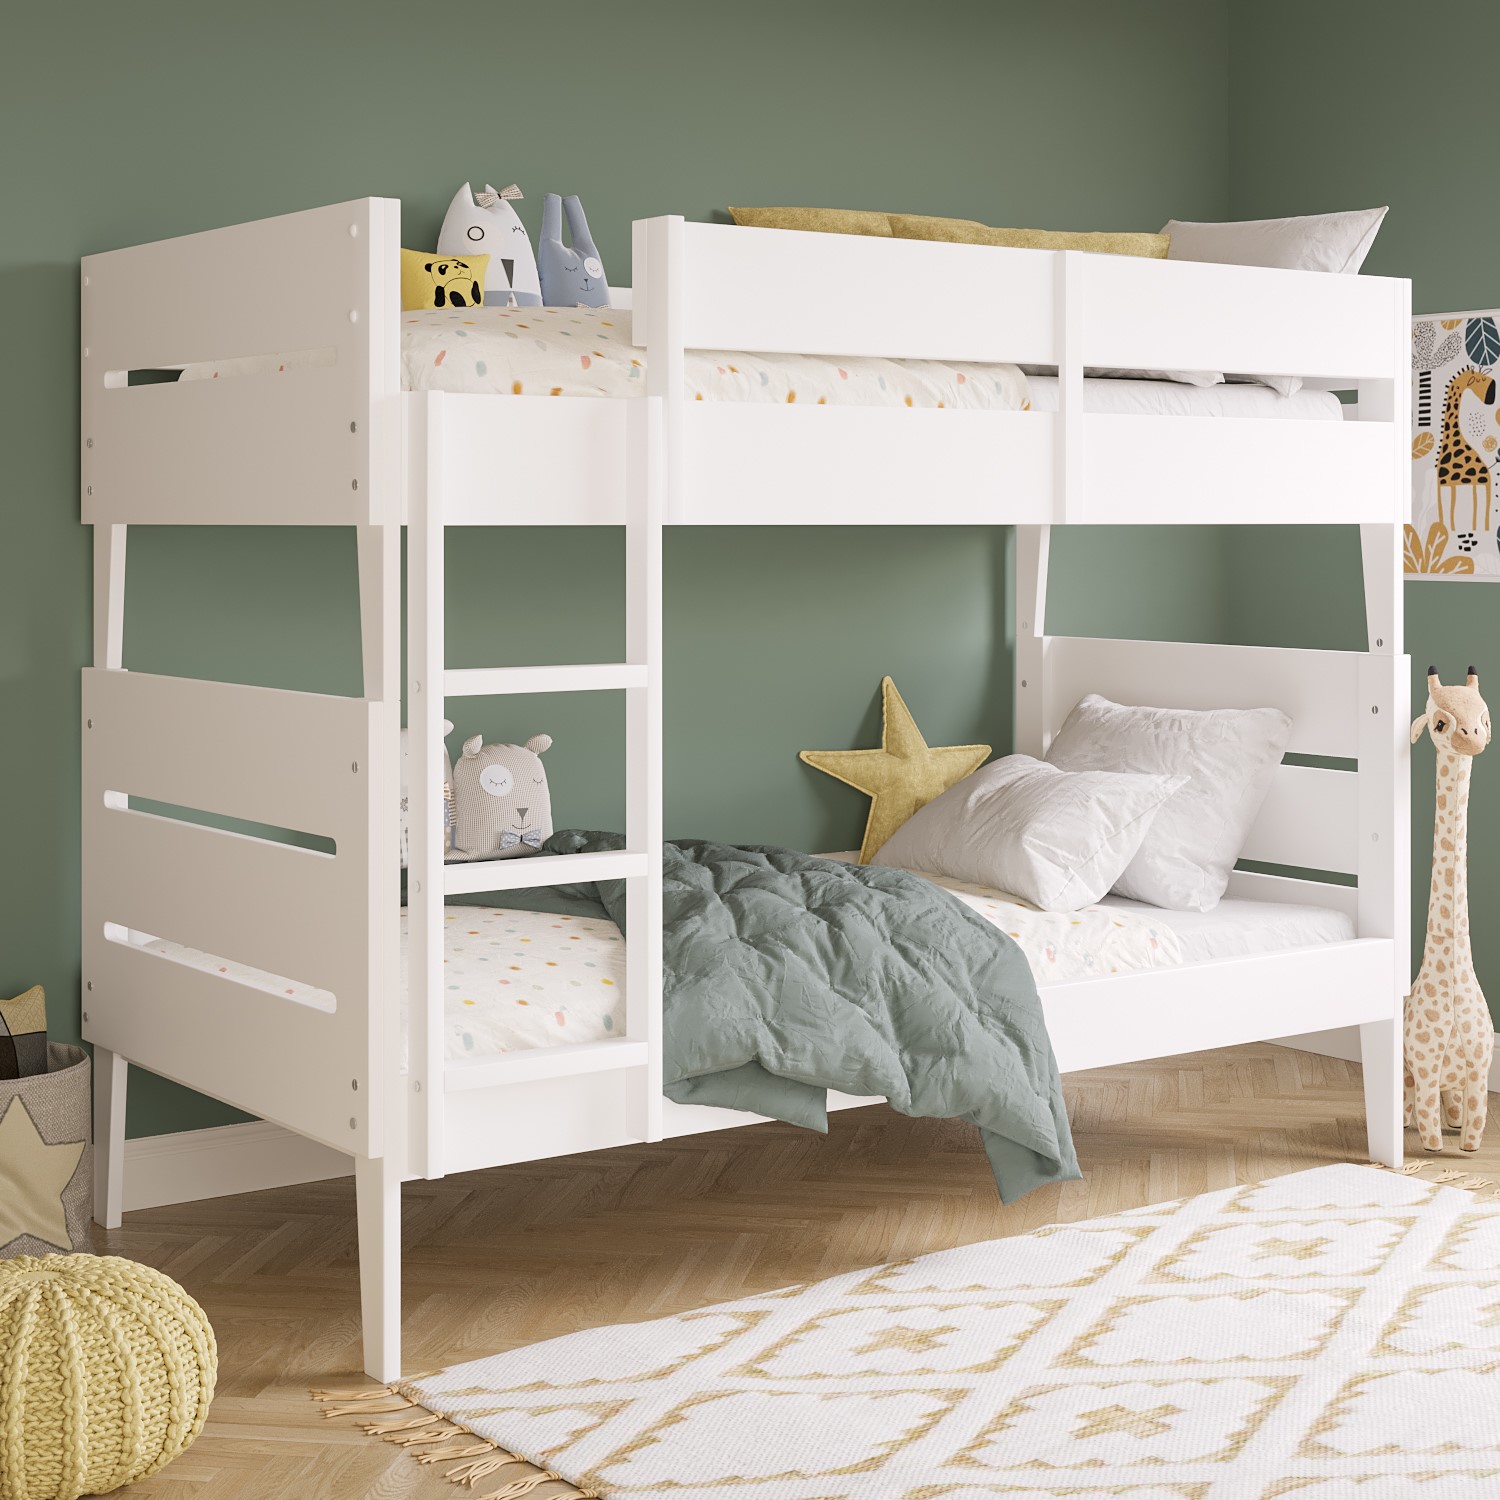 Photo of White wooden detachable bunk bed - hugo